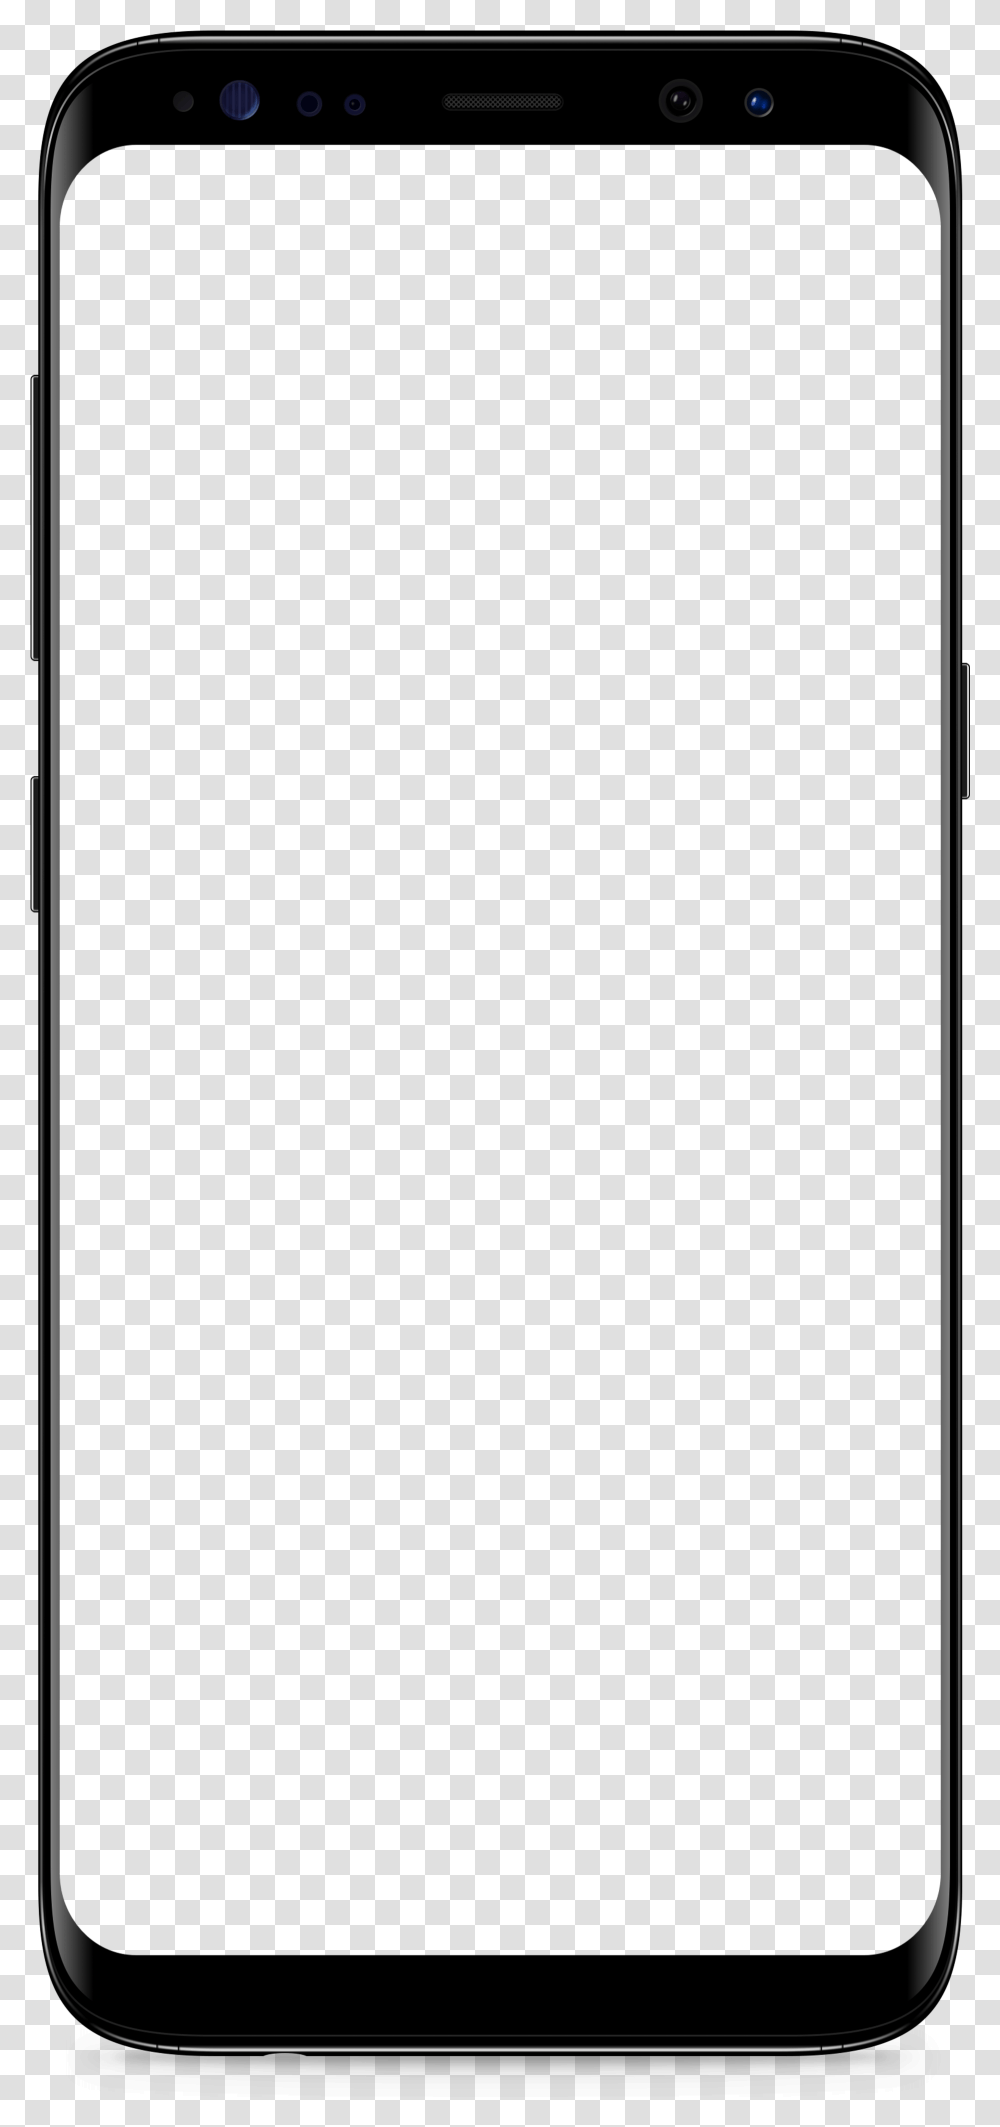 Samsung Galaxy S8 Black Background Portable Communications Device, Mobile Phone, Electronics, Cell Phone, Iphone Transparent Png